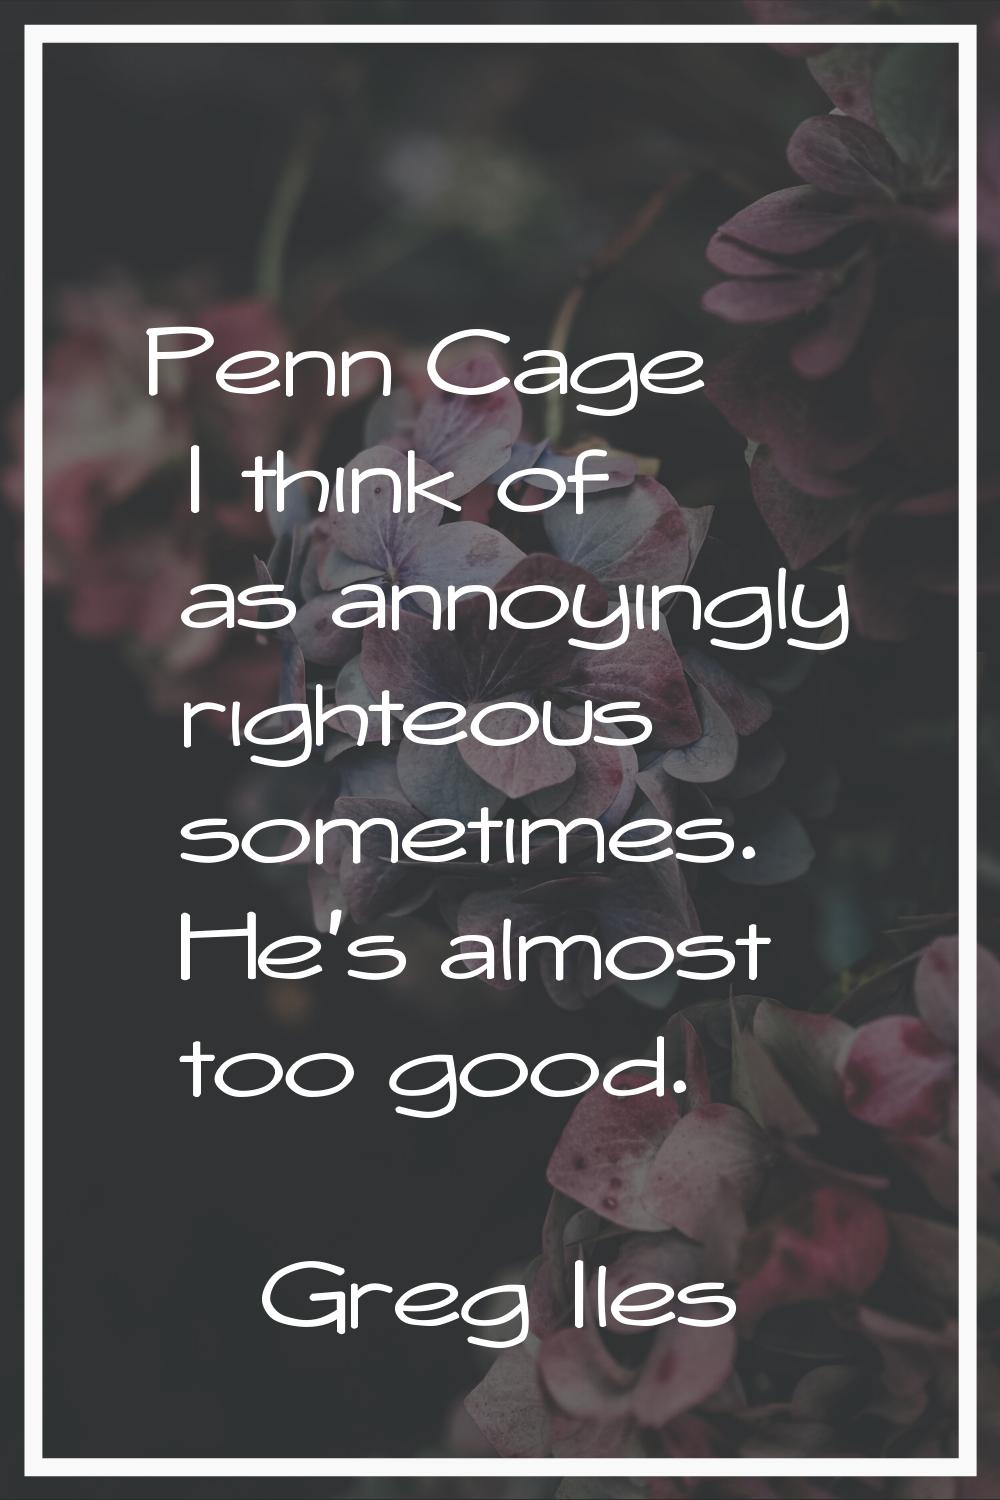 Penn Cage I think of as annoyingly righteous sometimes. He's almost too good.